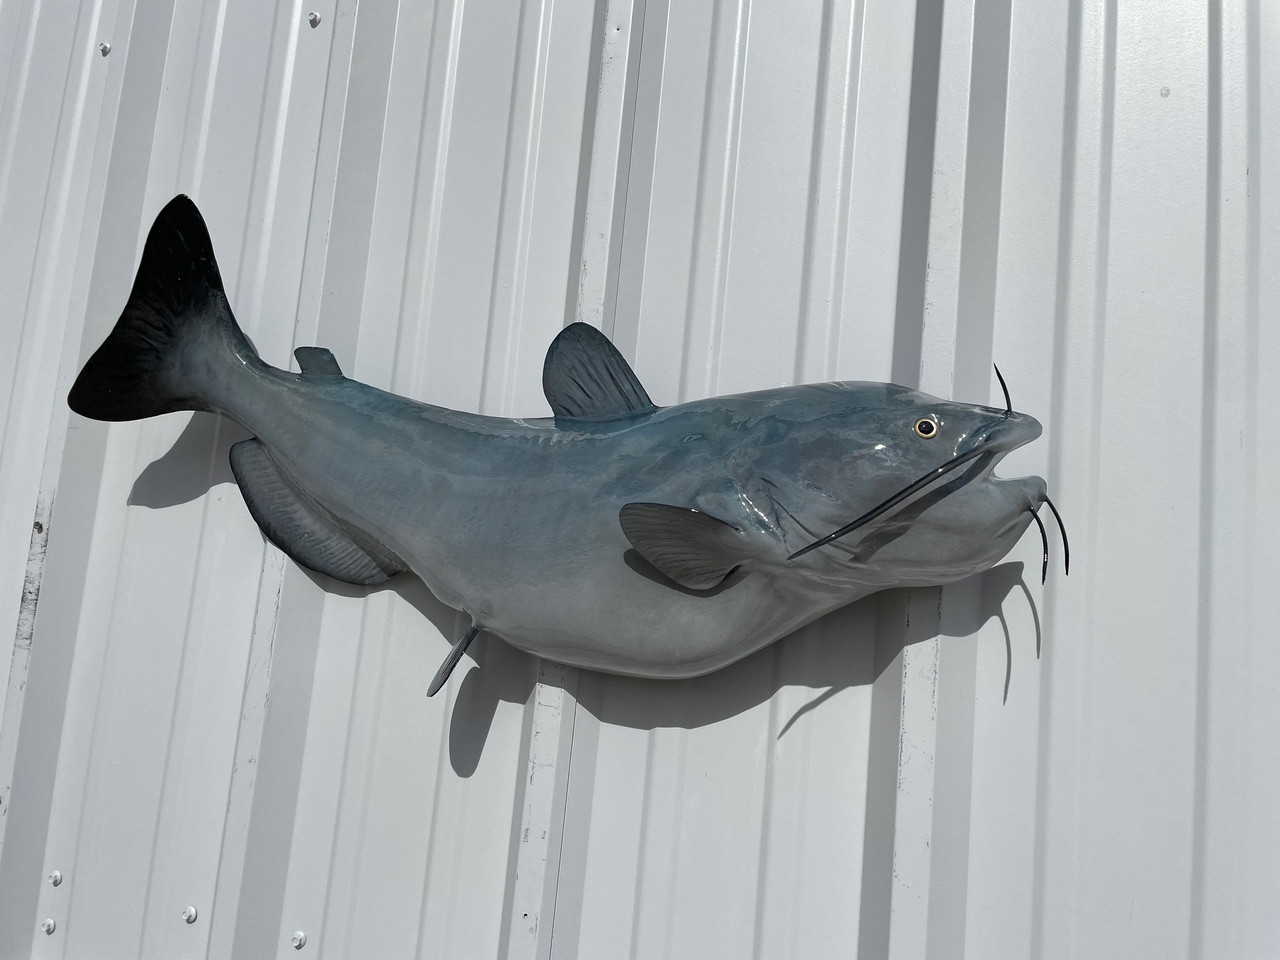 34 Inch Blue Catfish Half Sided Fish Mount Replica Reproduction